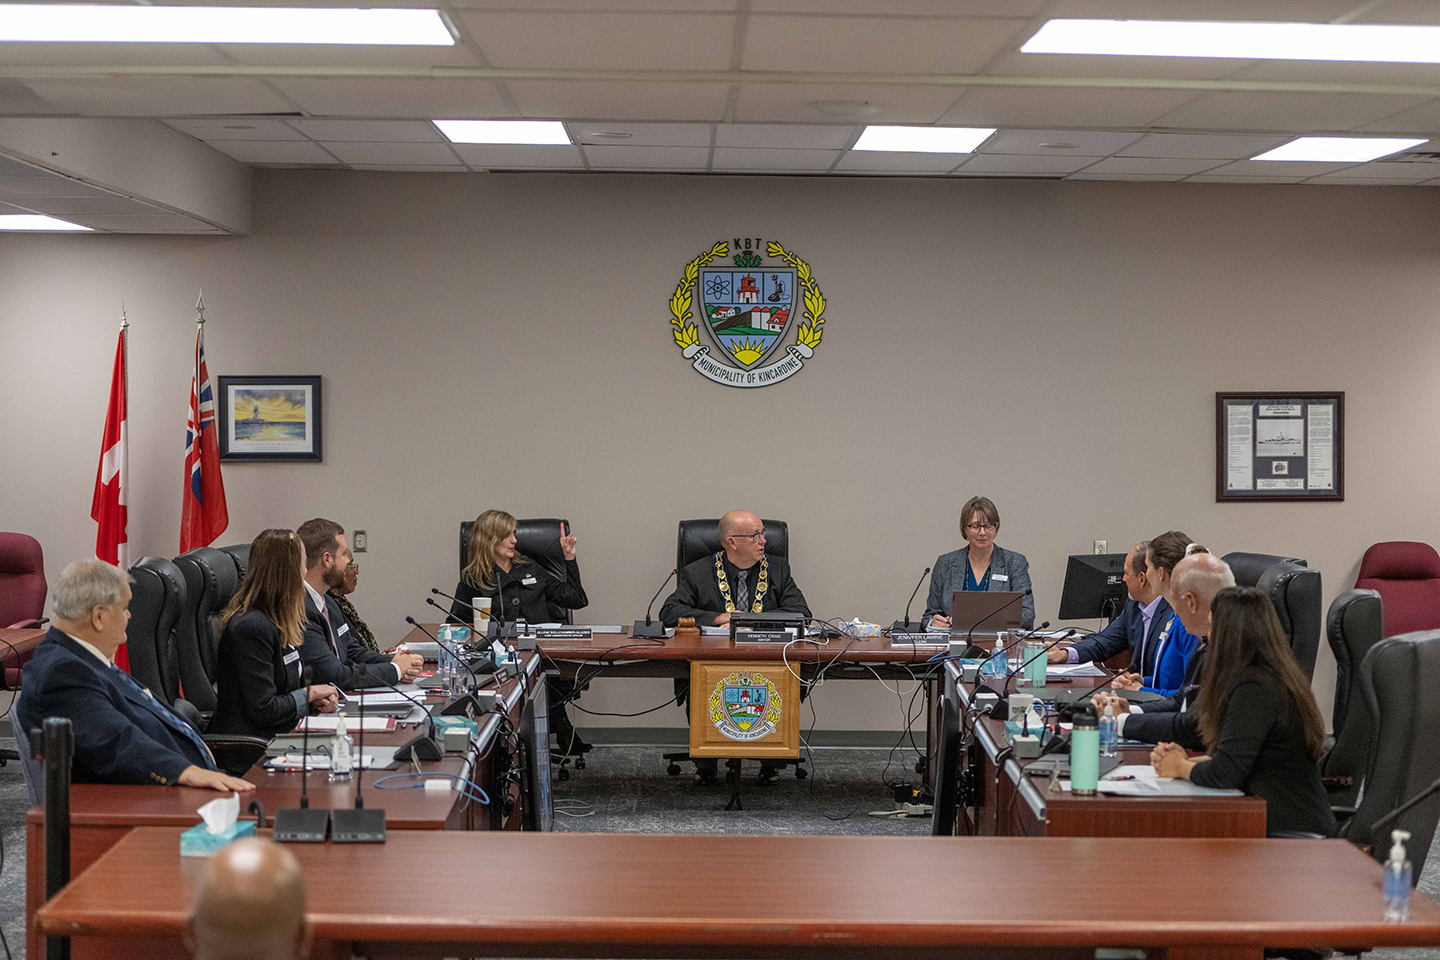 The Municipality of Kincardine 2022-2026 Council in chambers.